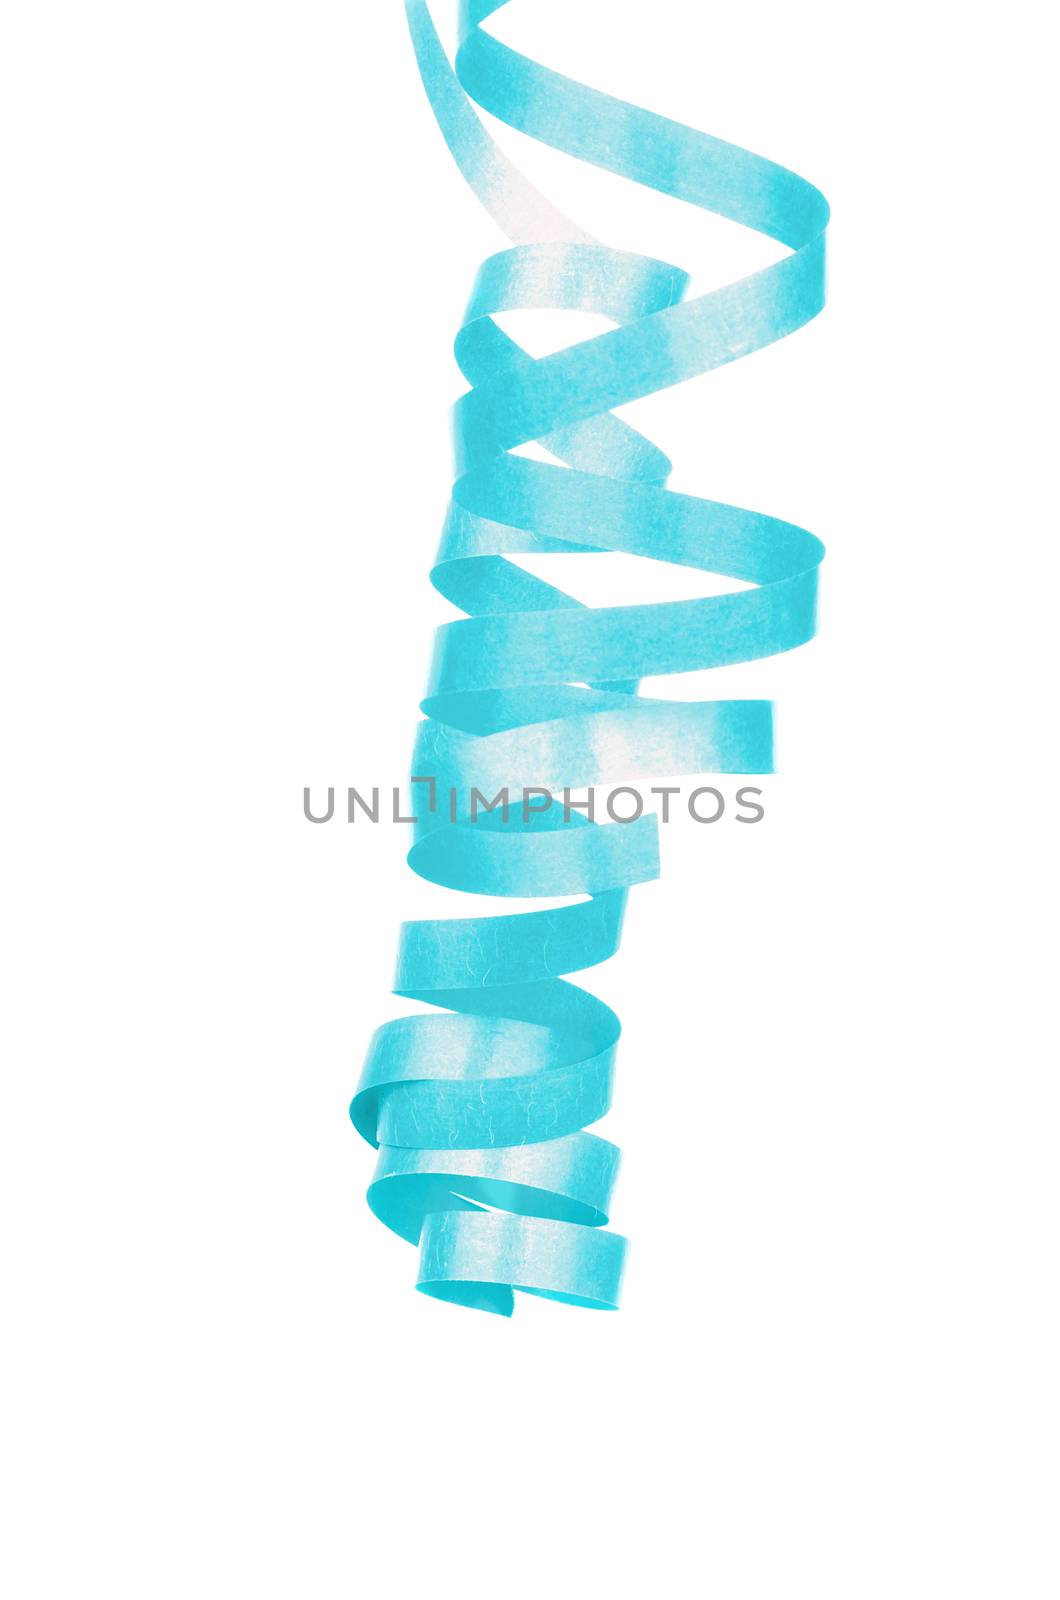 Blue Curled Party Streamer Hanging Down Isolated on White background